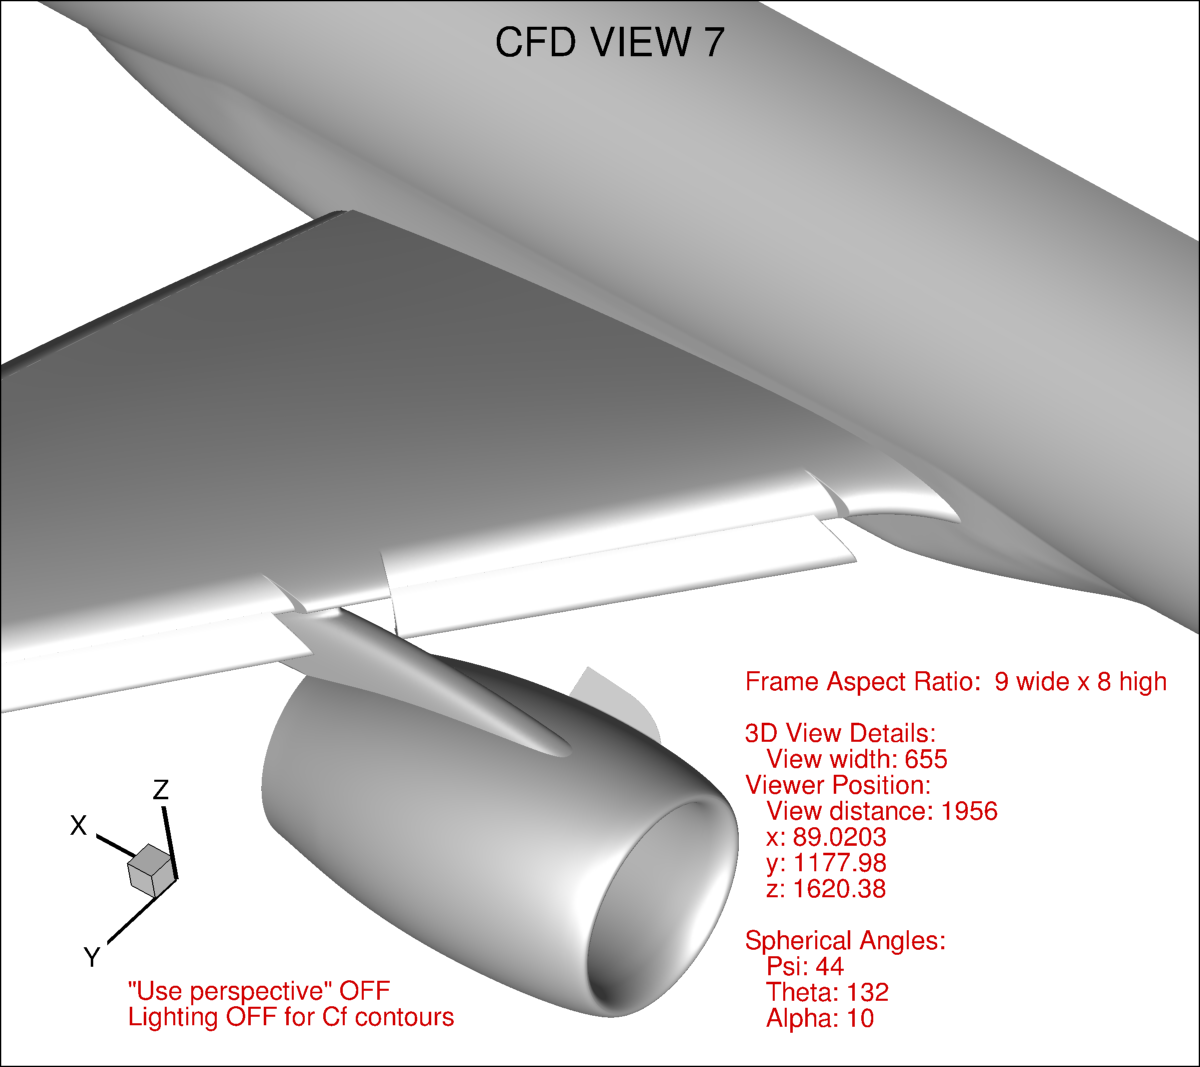 Example CFD view #7